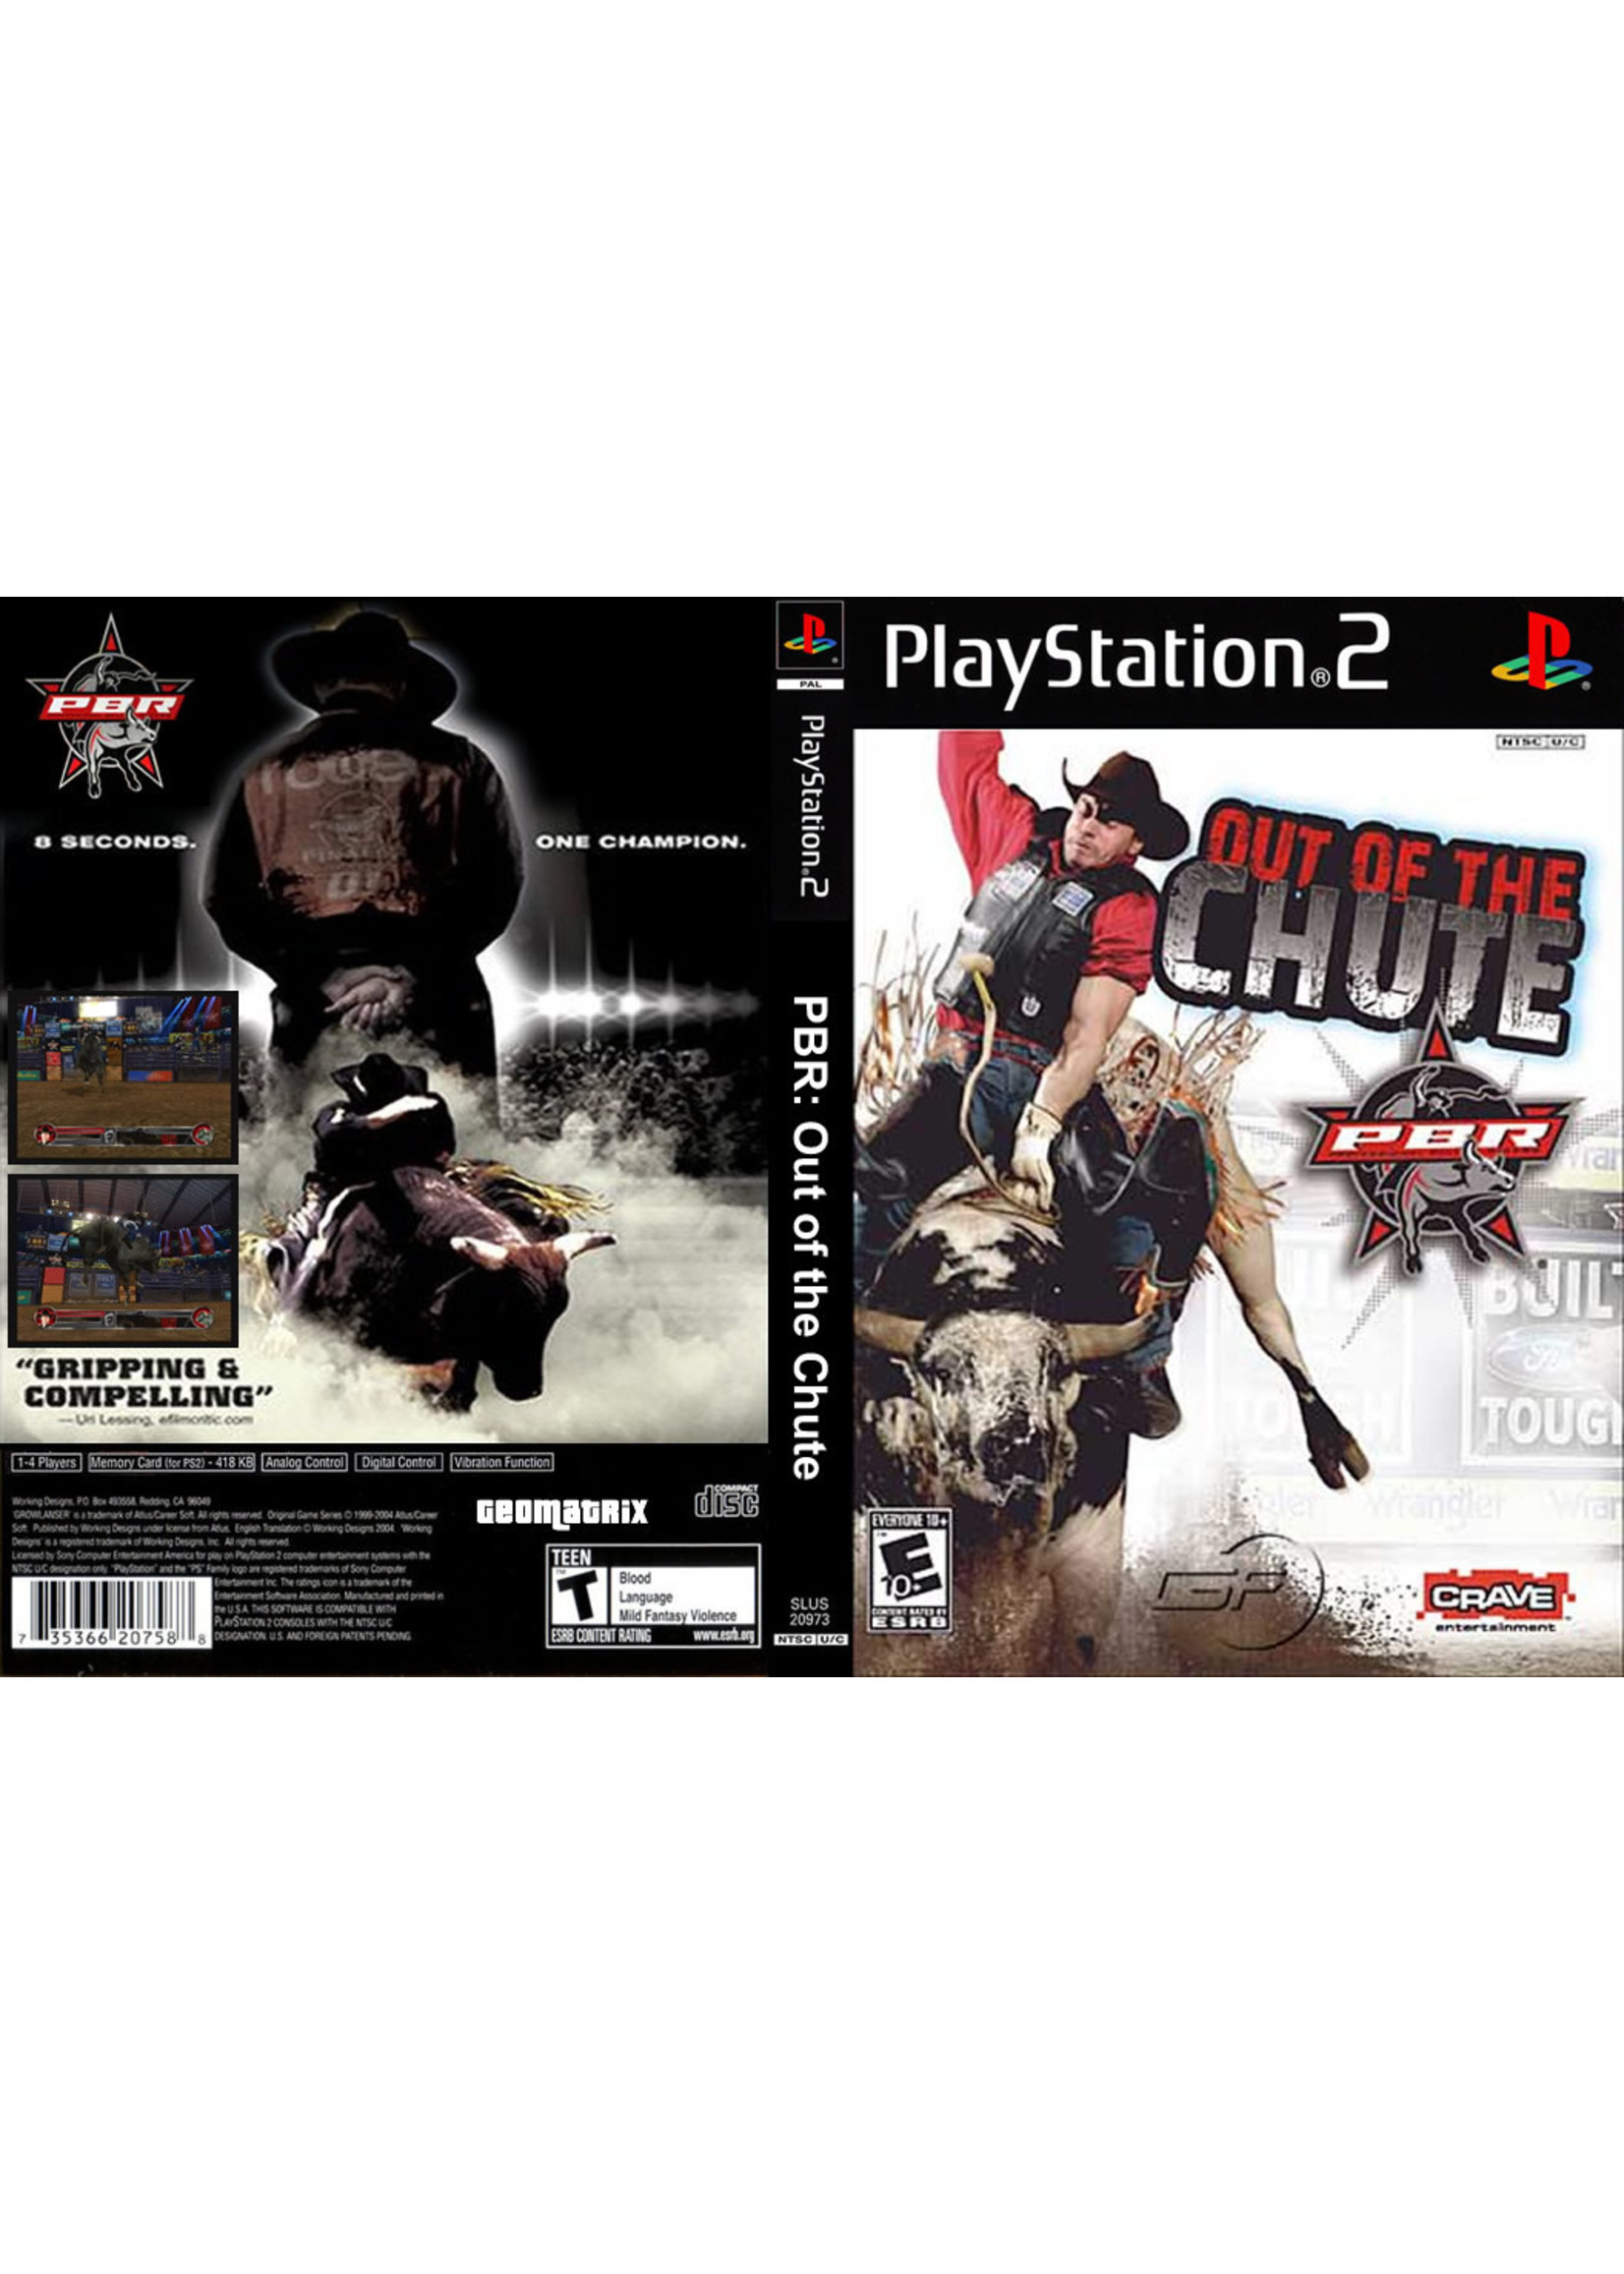 Sony Playstation 2 (PS2) Out of the Chute